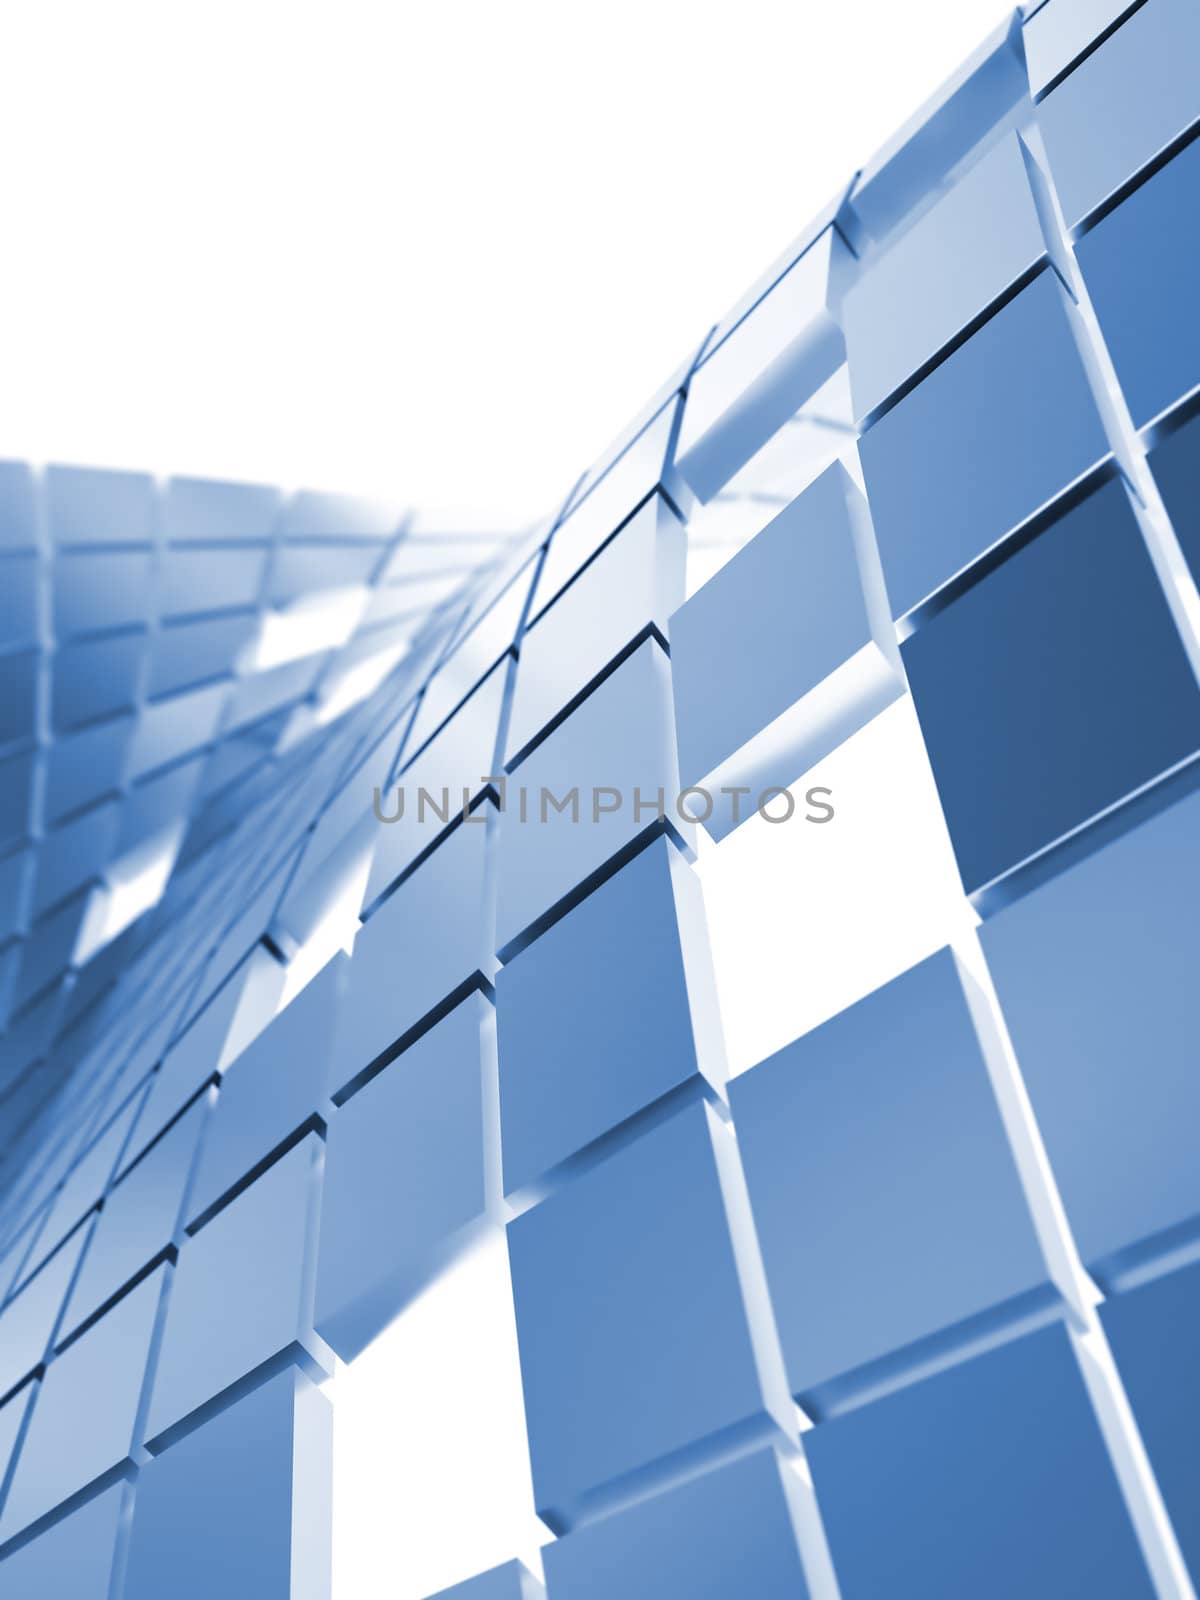 abstract background from blue metallic cubes on a white